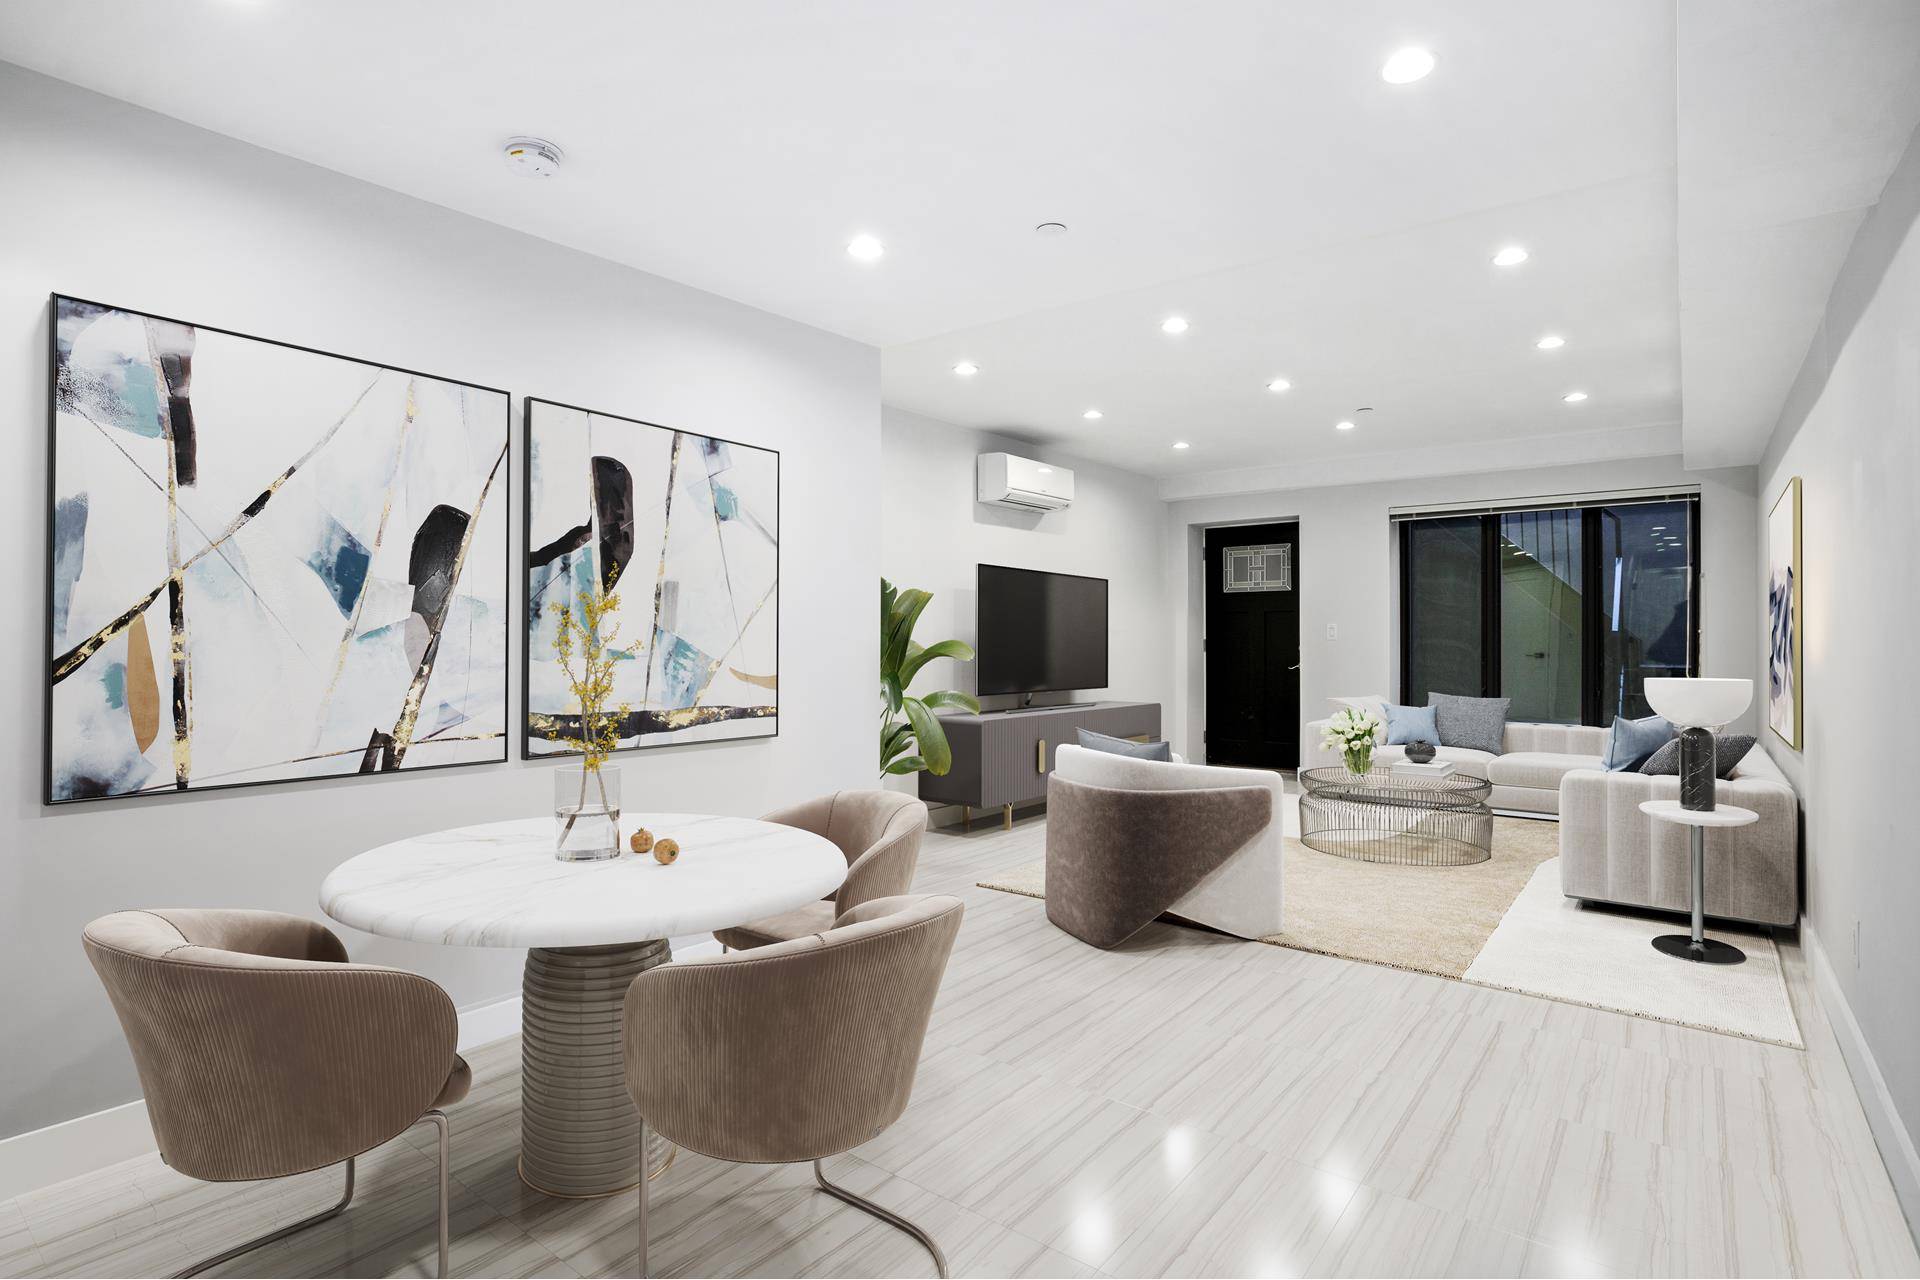 Welcome to 1419 Herkimer Street, a newly constructed boutique rental building comprised of ten residences in the heart of Ocean Hill, Brooklyn.